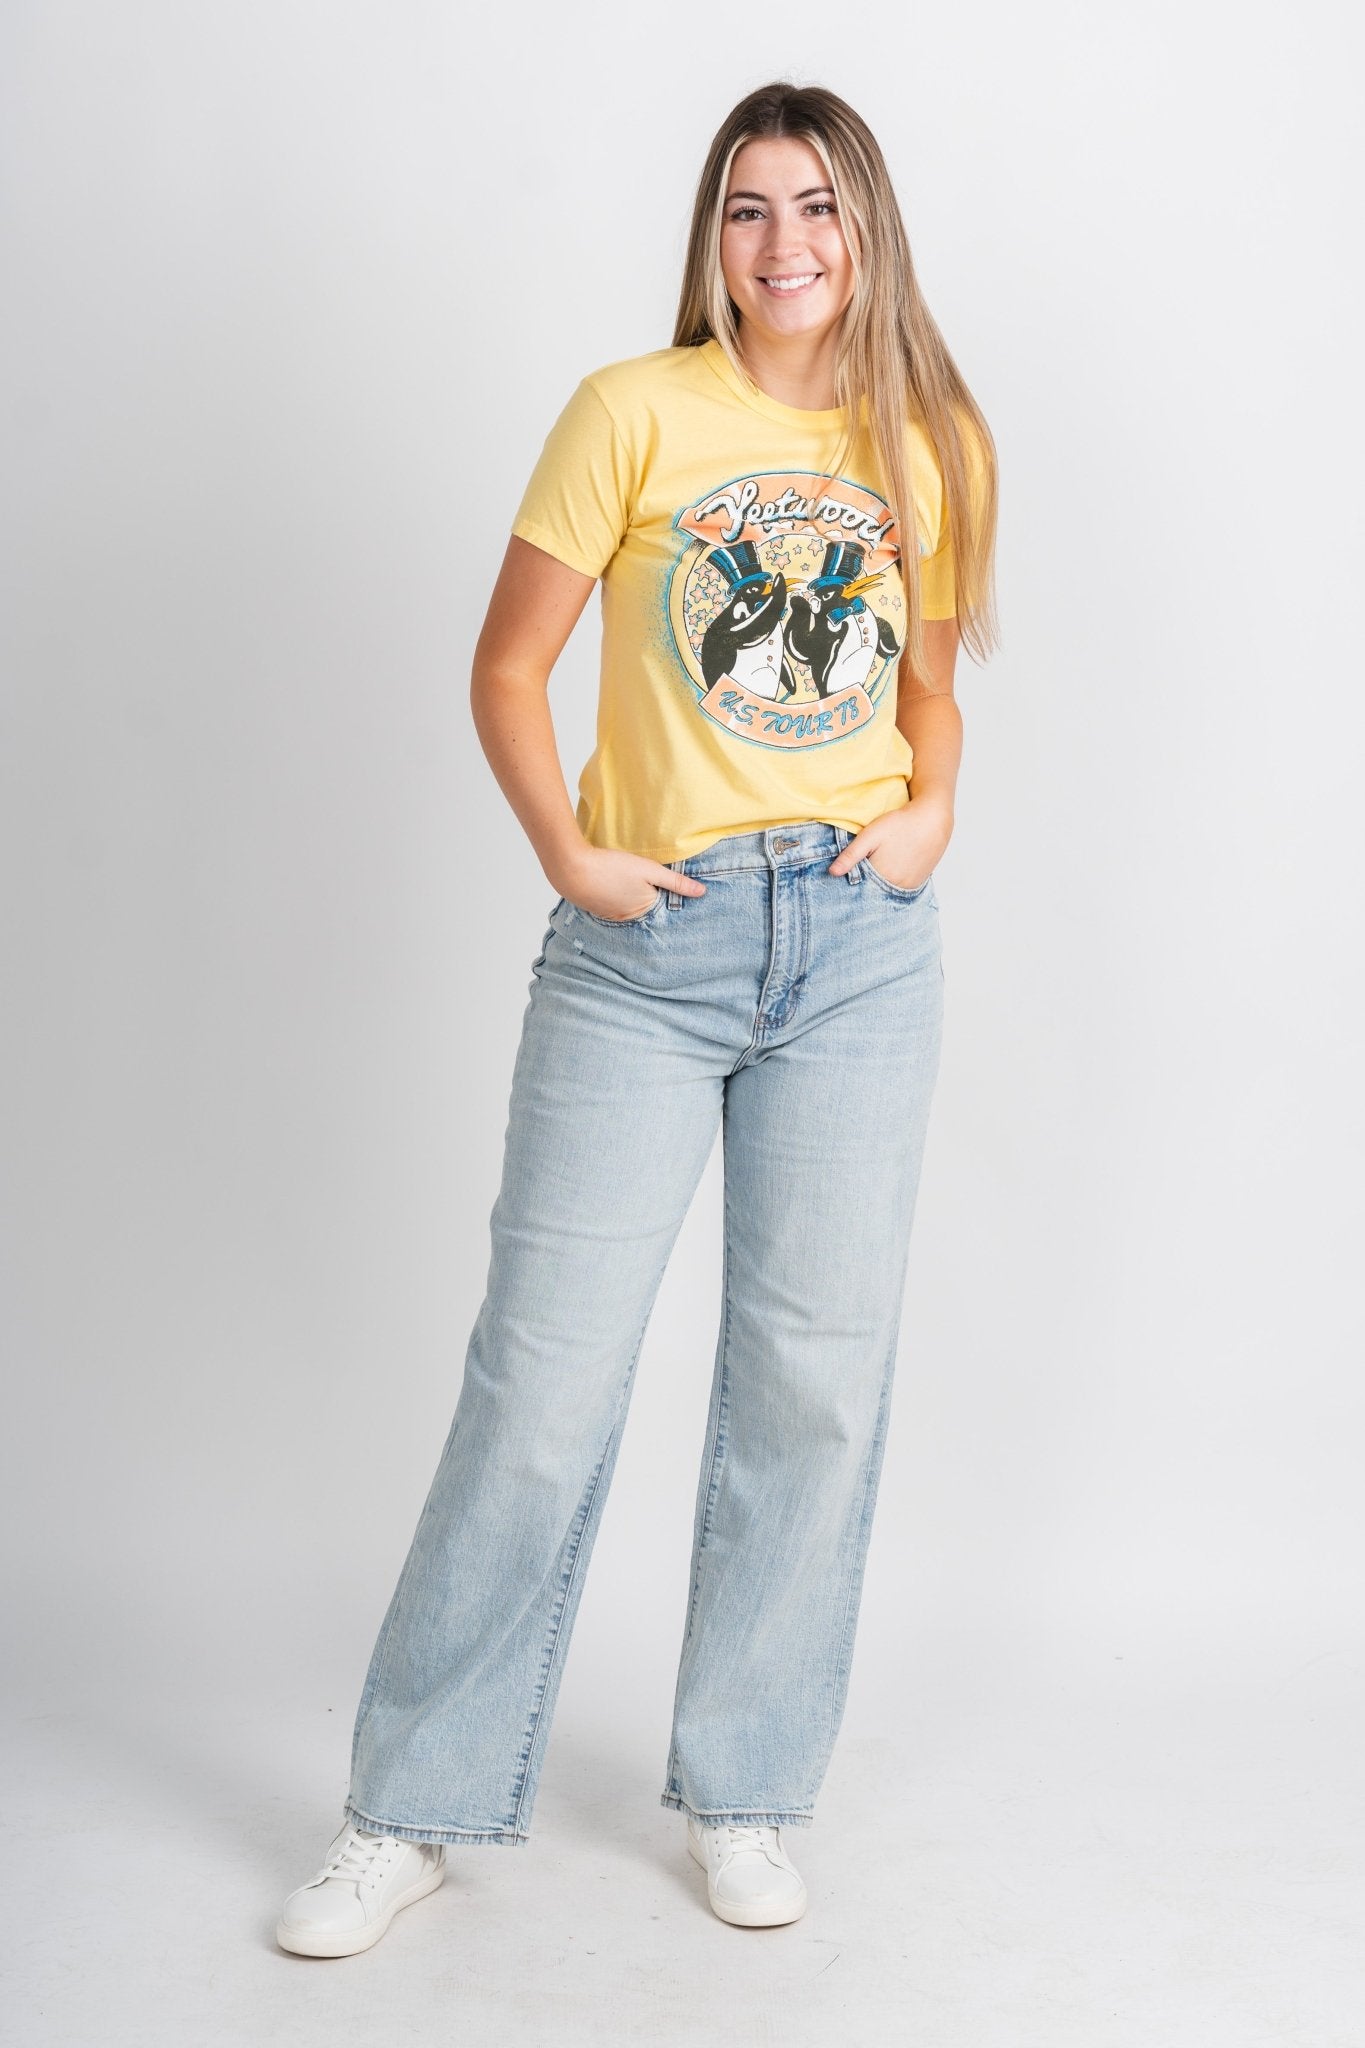 DayDreamer Fleetwood Mac tour 78 ringer t-shirt yellow bloom - DayDreamer Clothing at Lush Fashion Lounge Trendy Boutique in Oklahoma City